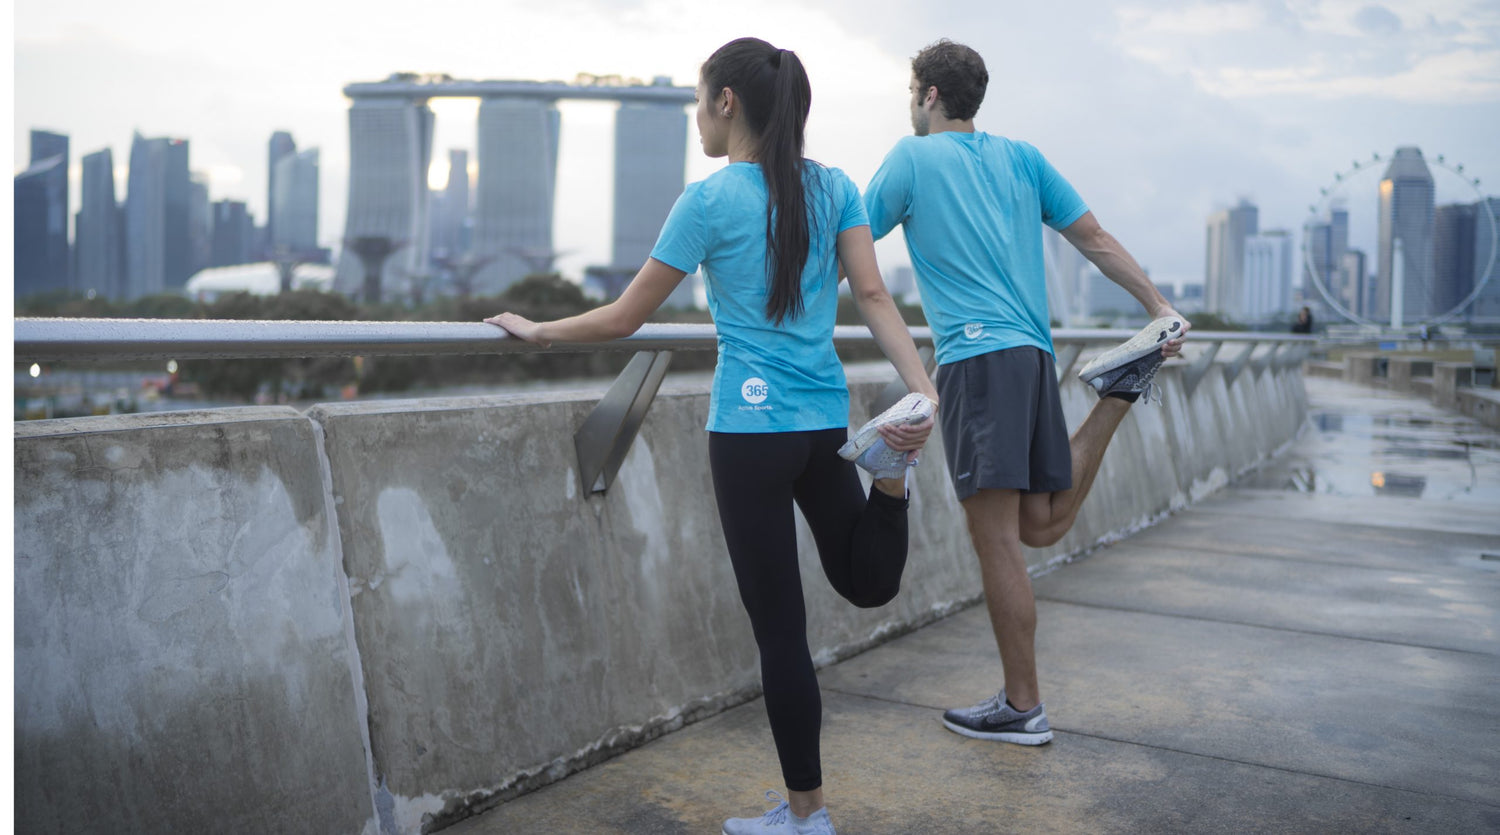 Two sports persons; one female and one male wearing blue t-shirts doing exercise while standing in front of towers building.